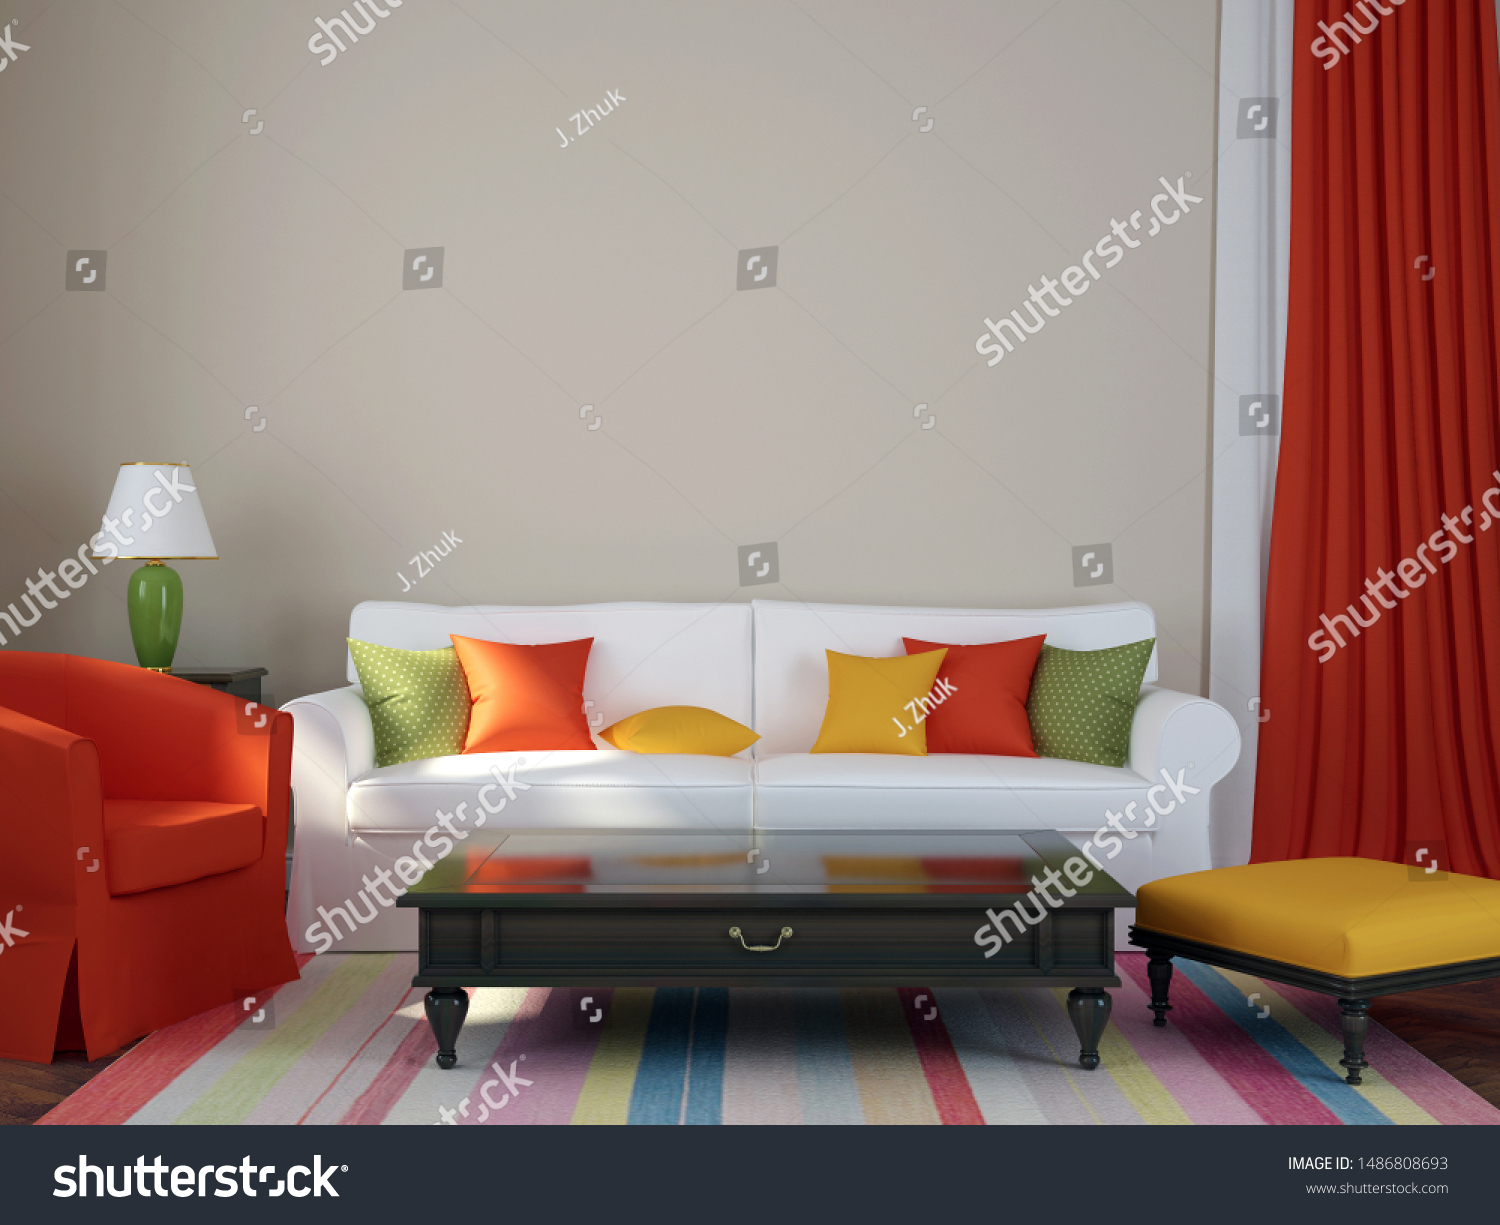 Colorful composition made in a trendy eclectic style, consisting of a sofa, armchair, pouf, coffee table and curtains. 3D illustration #1486808693